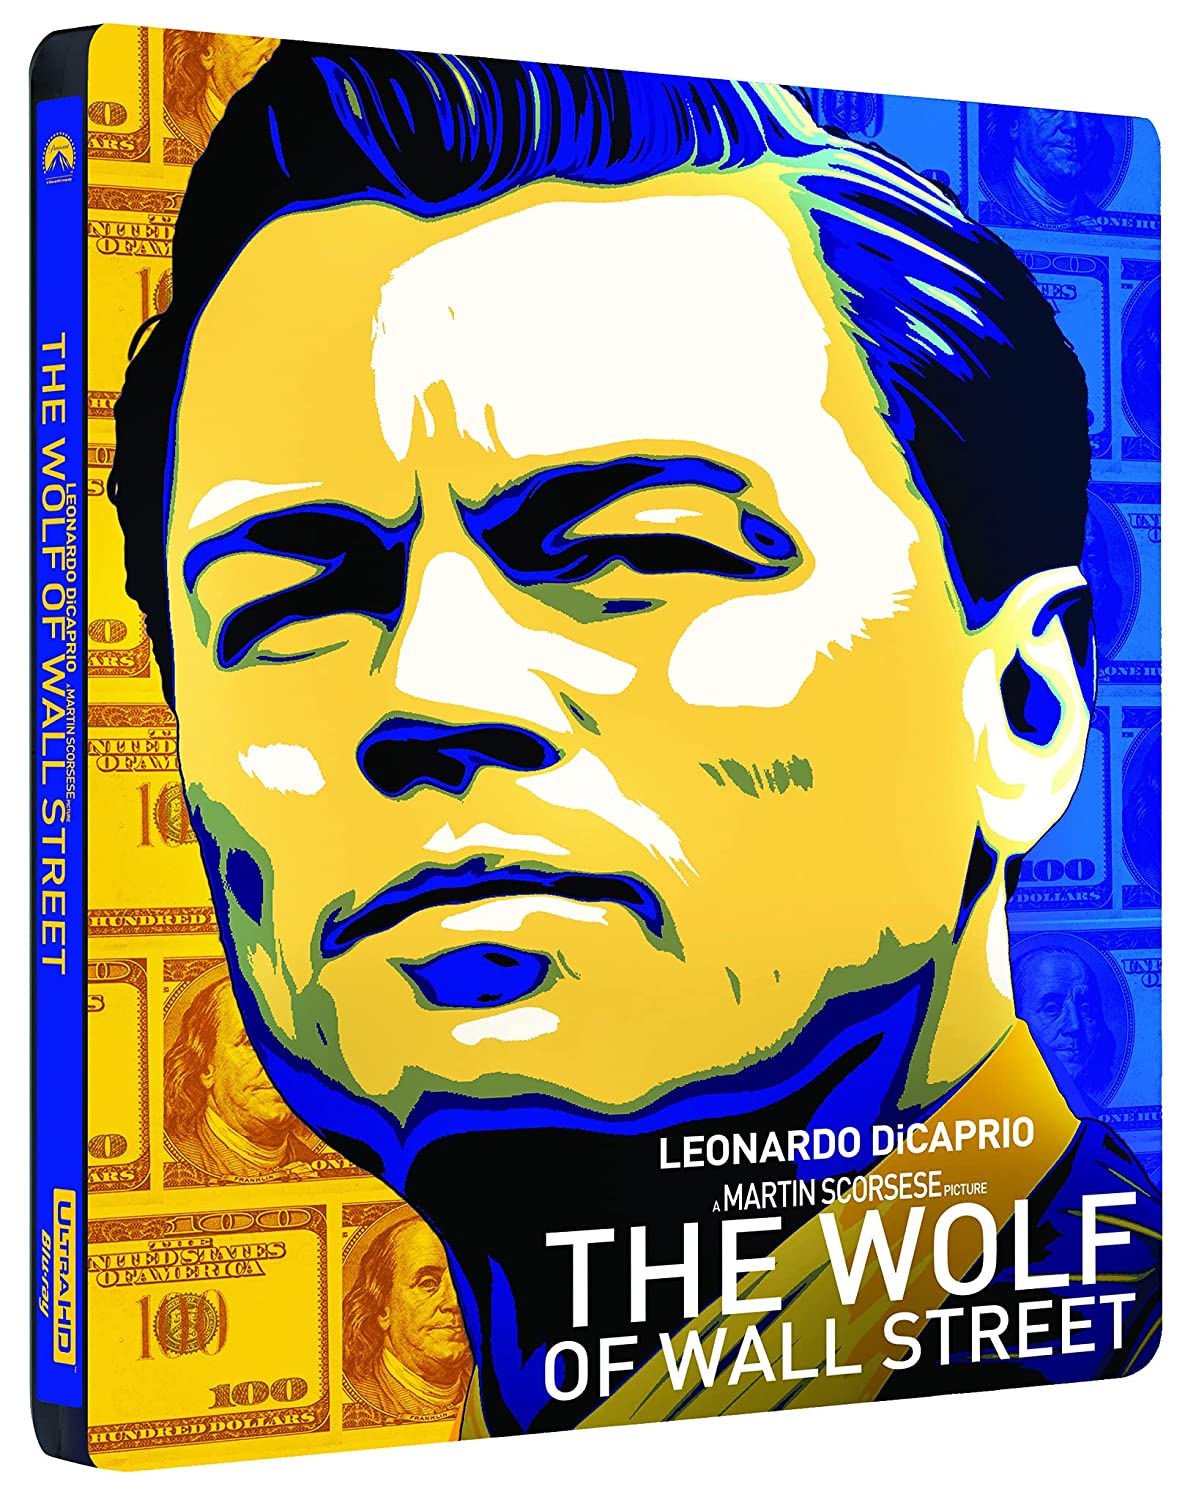 The Wolf of Wall Street 4k SteelBook front angle